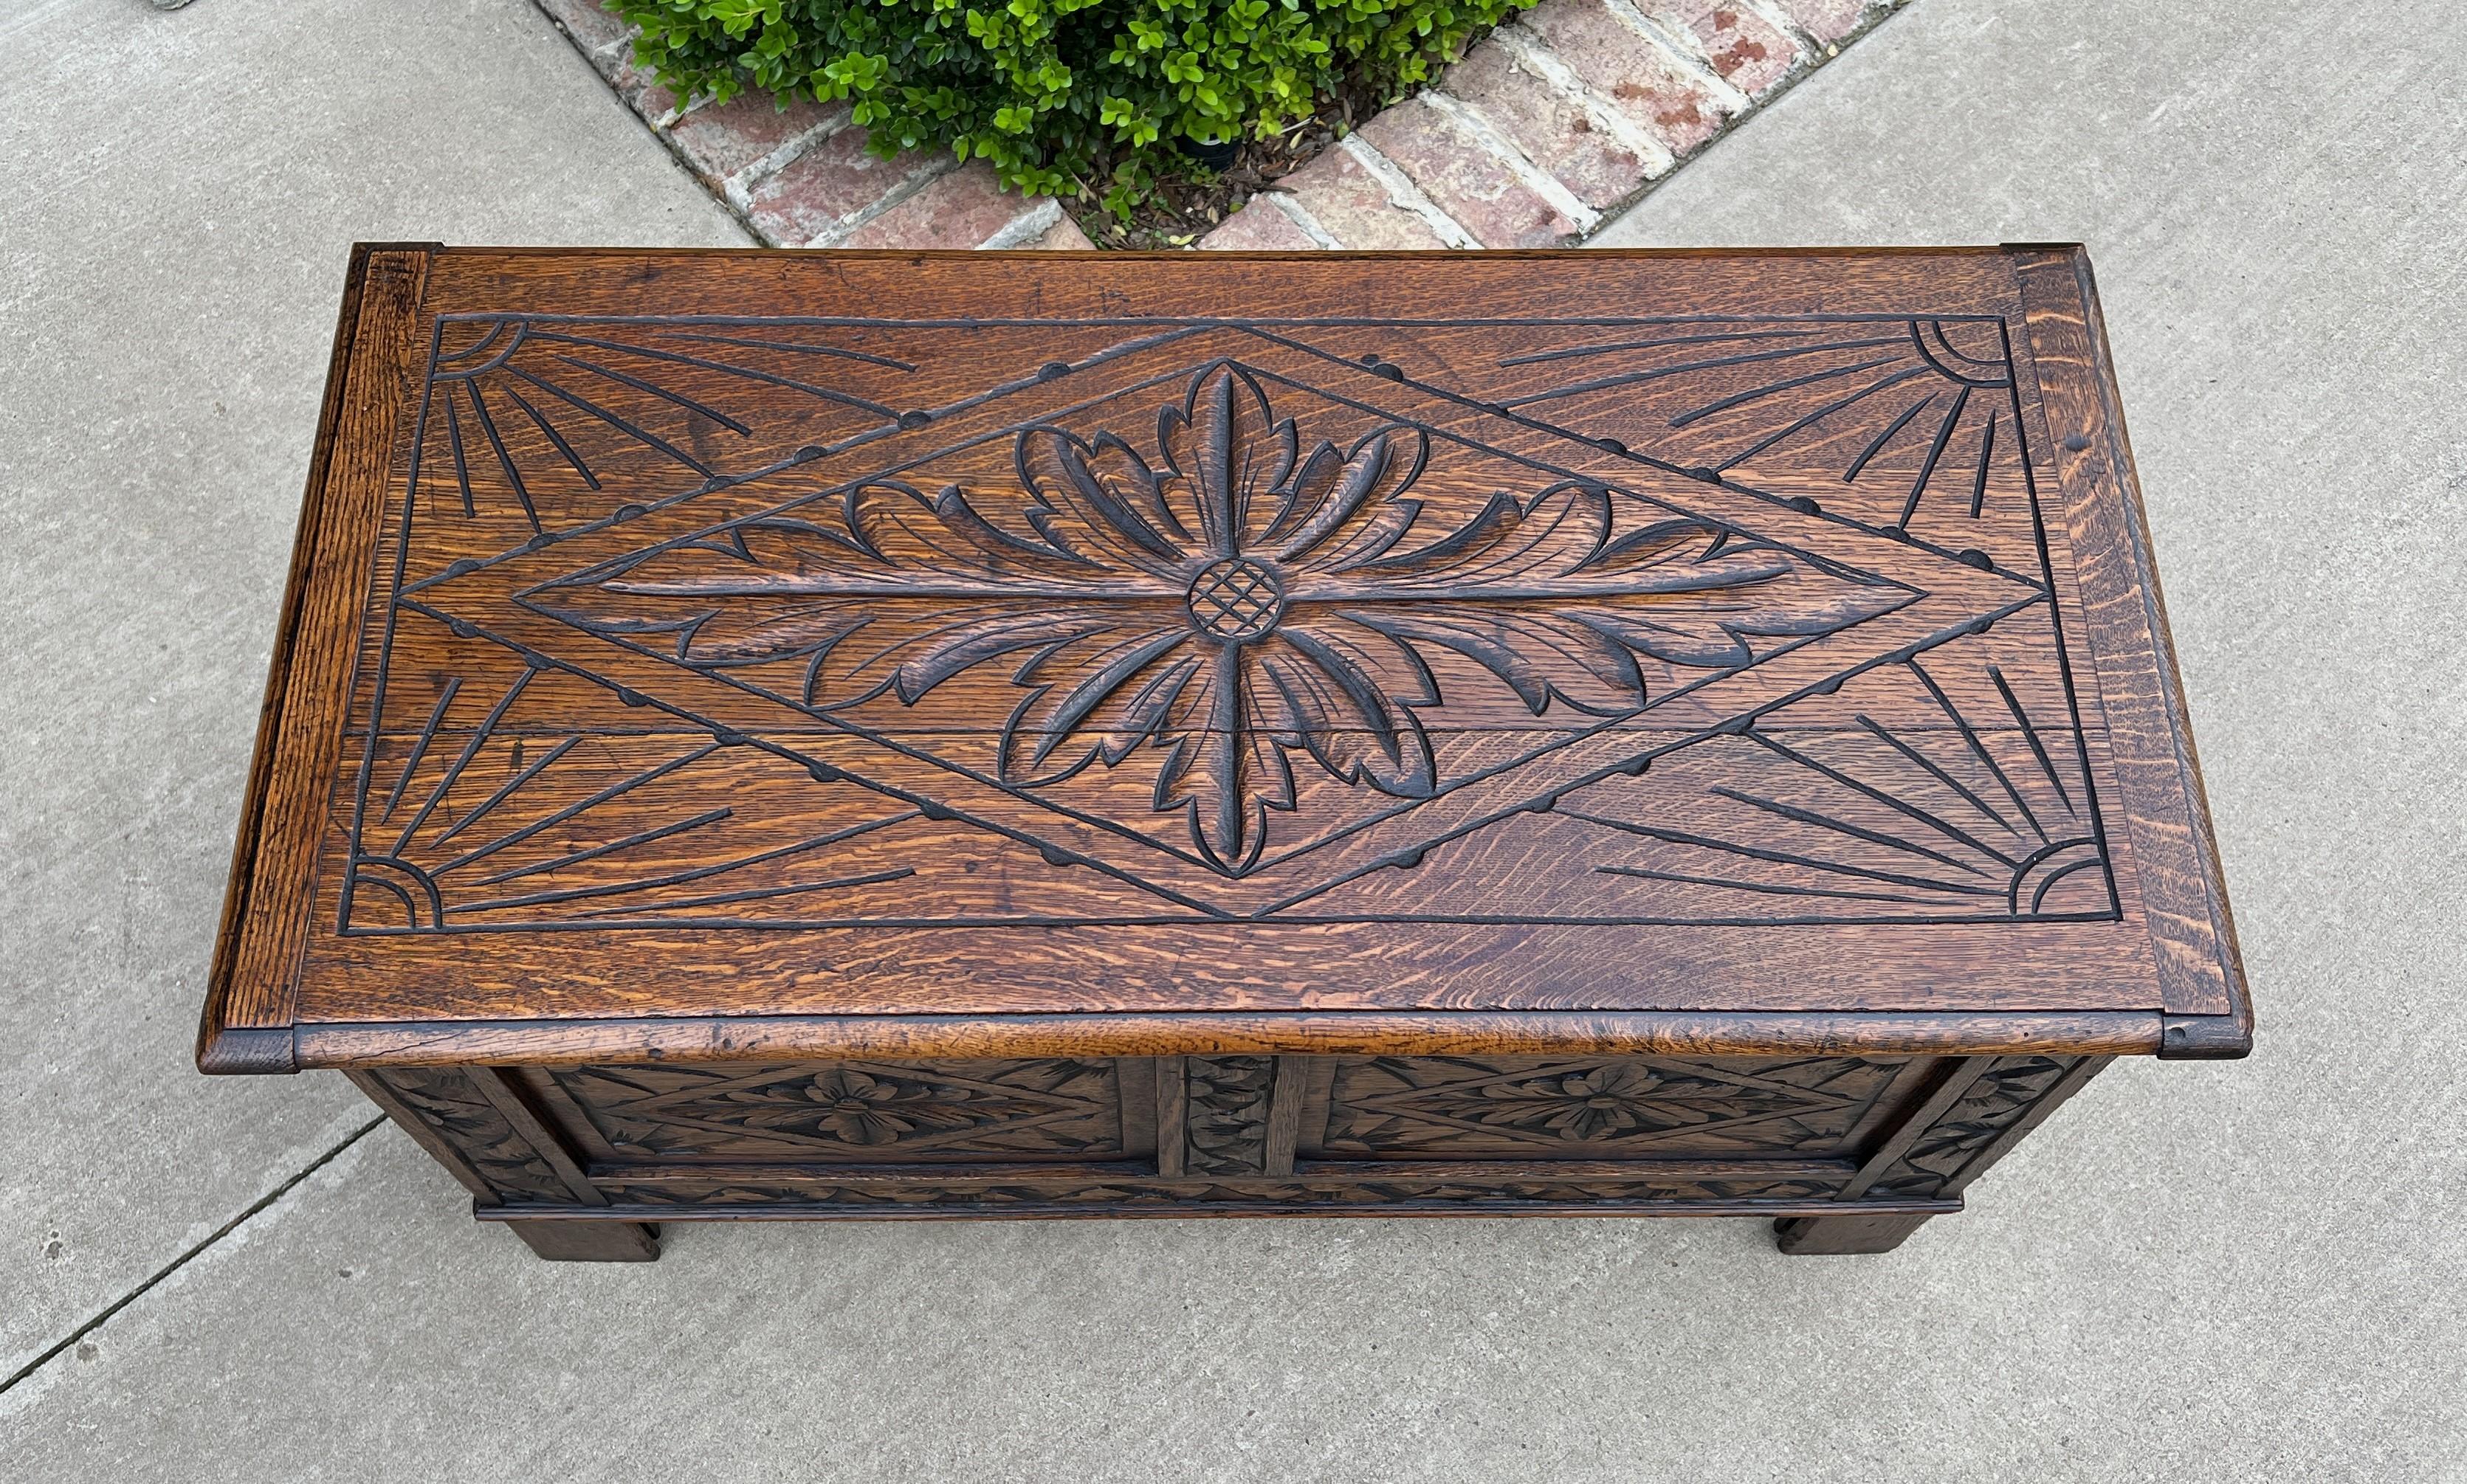 Early 20th Century Antique English Blanket Box Chest Trunk Coffee Table Storage Chest Coffer Oak